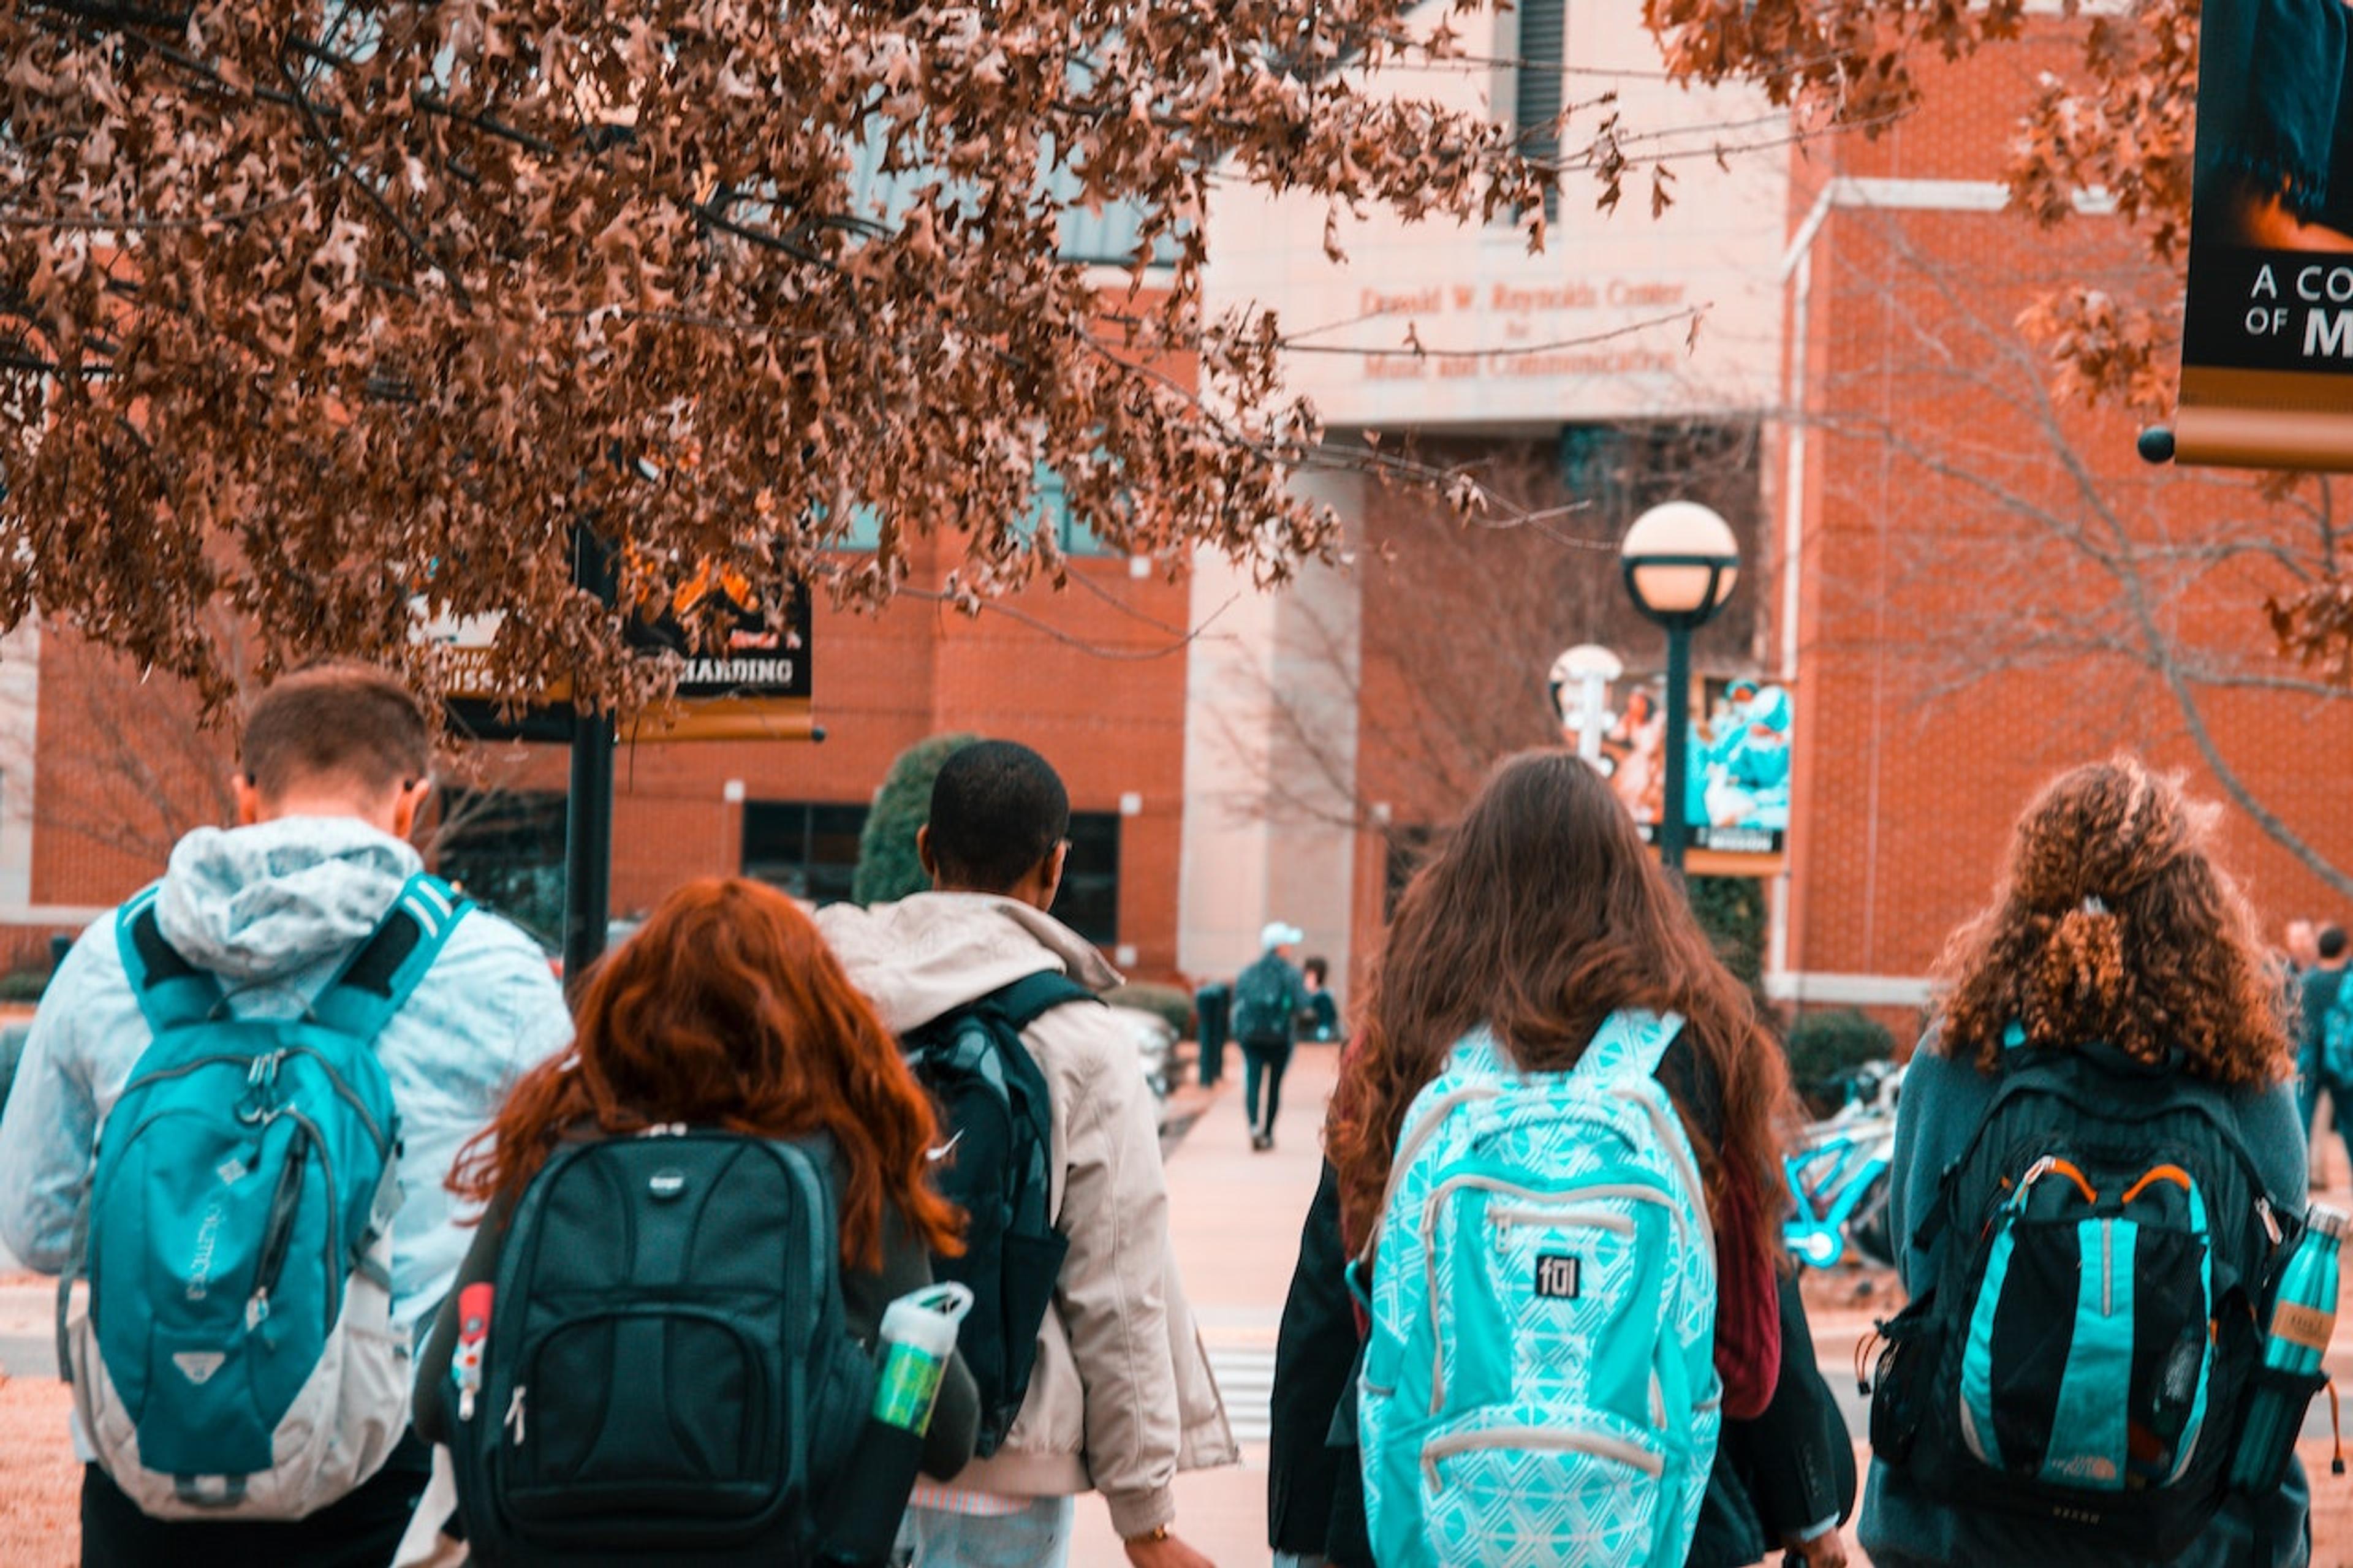 Several students, all wearing backpacks, walk toward a red brick building on a fall day